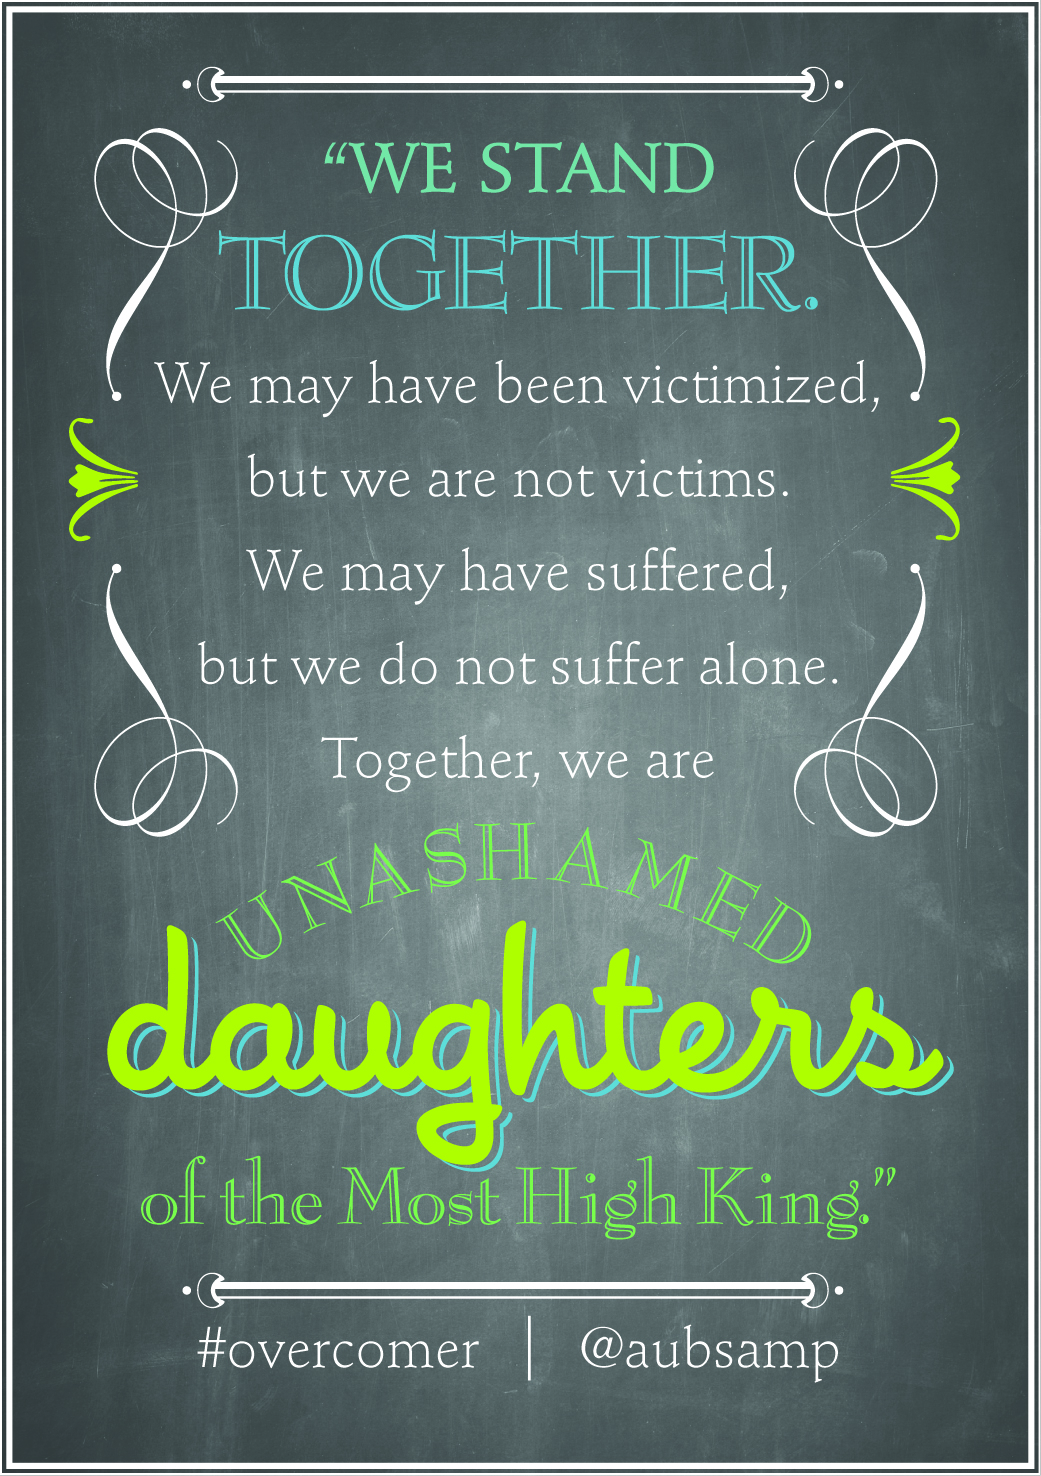 Unashamed Daughters of the Most High King